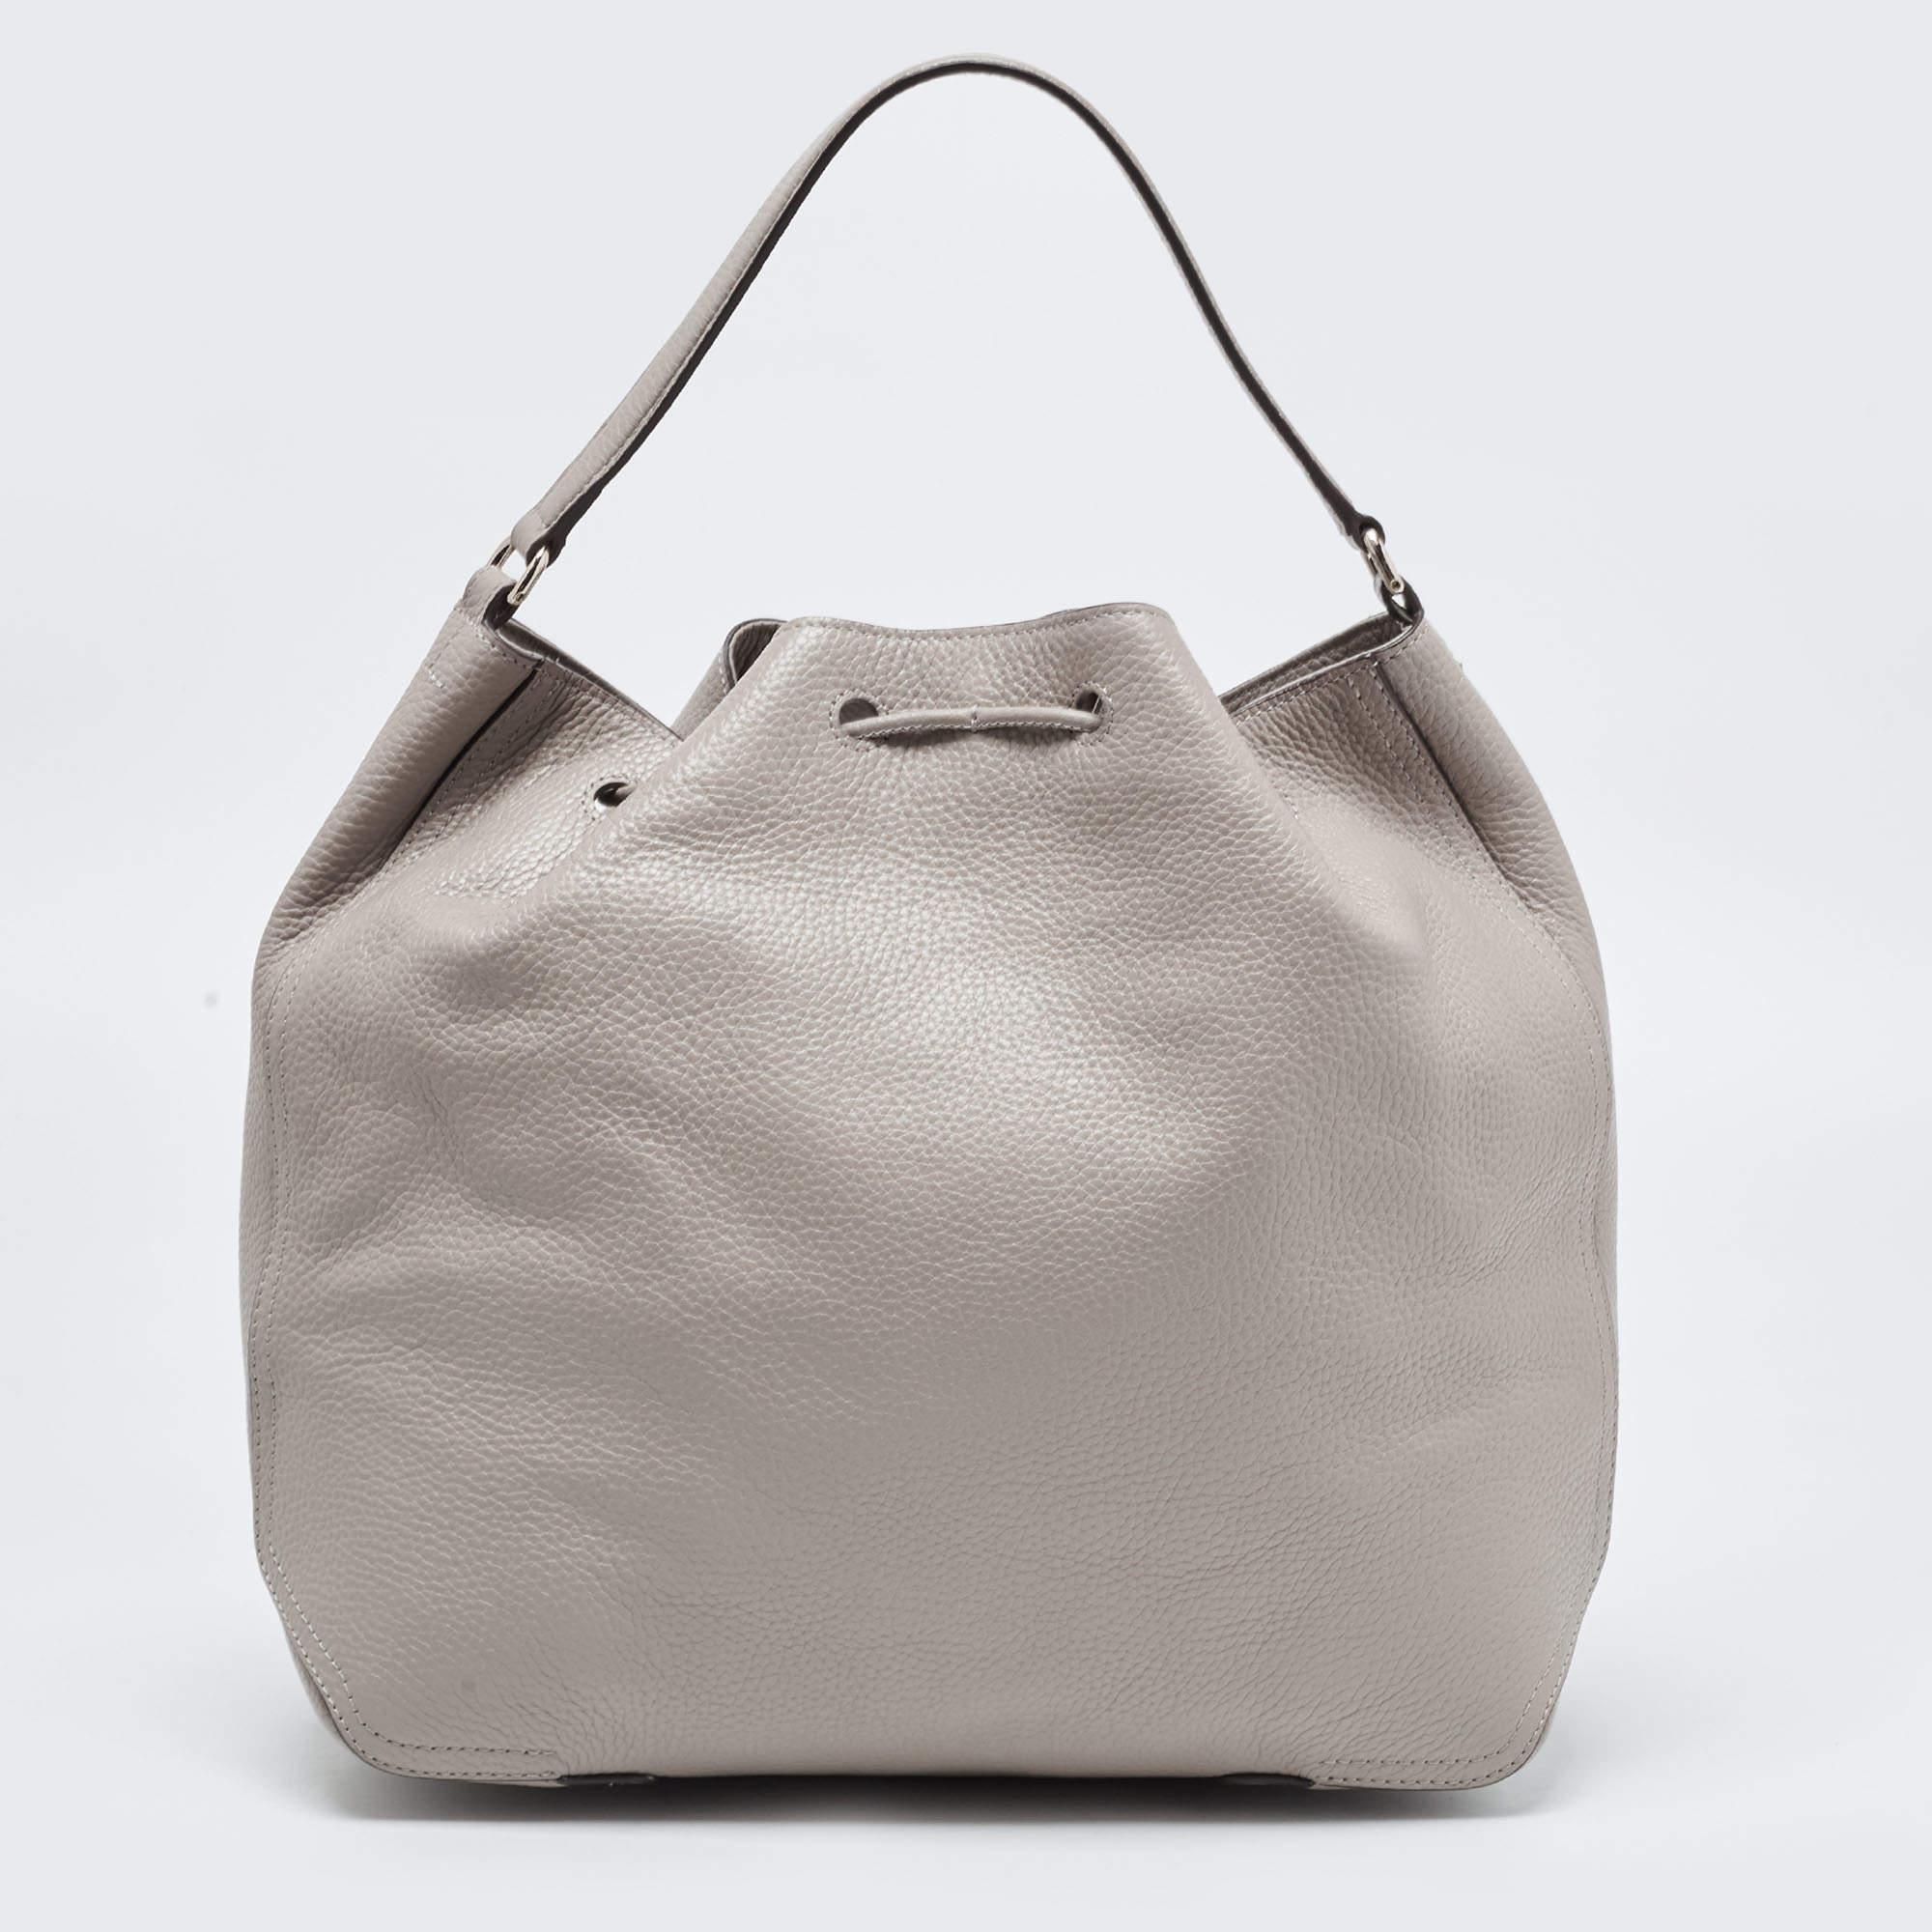 Designer bags are ideal companions for ample occasions! Here we have a fashion-meets-functionality piece crafted with precision. It has been equipped with a well-sized interior that can easily fit your essentials.

Includes: Info Booklet, Original